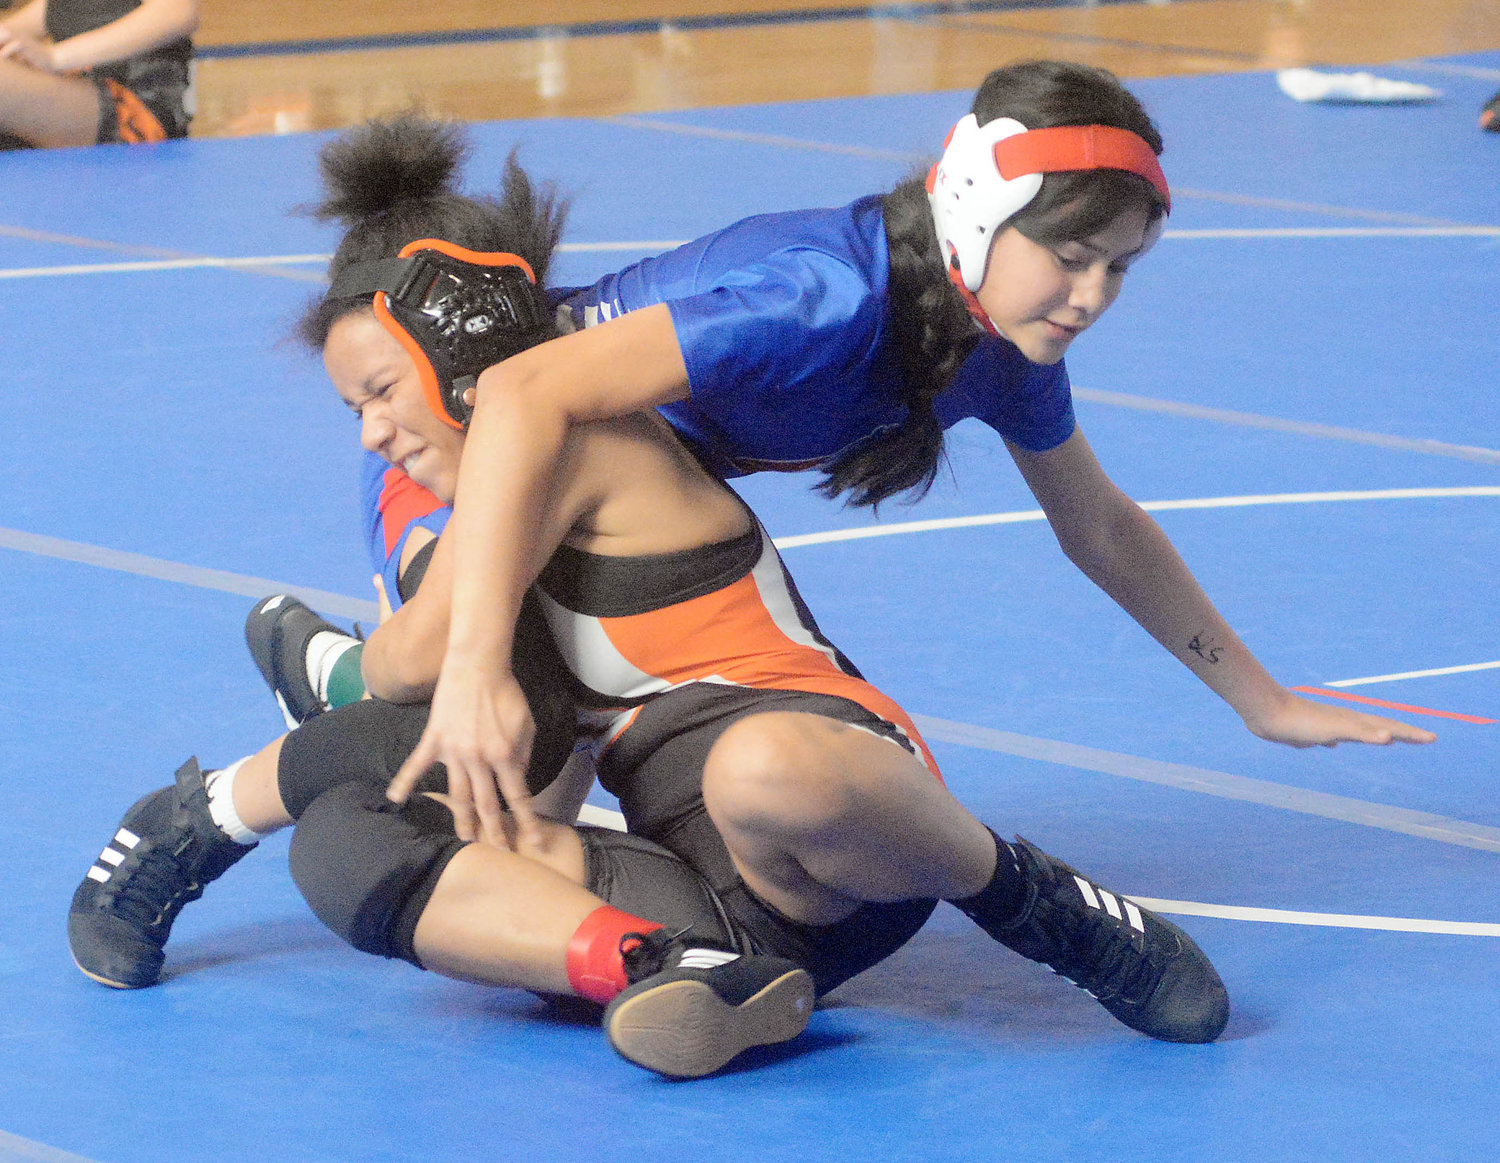 Briana Bodine (left) looks to take down her opponent during the tournament for Owensville.